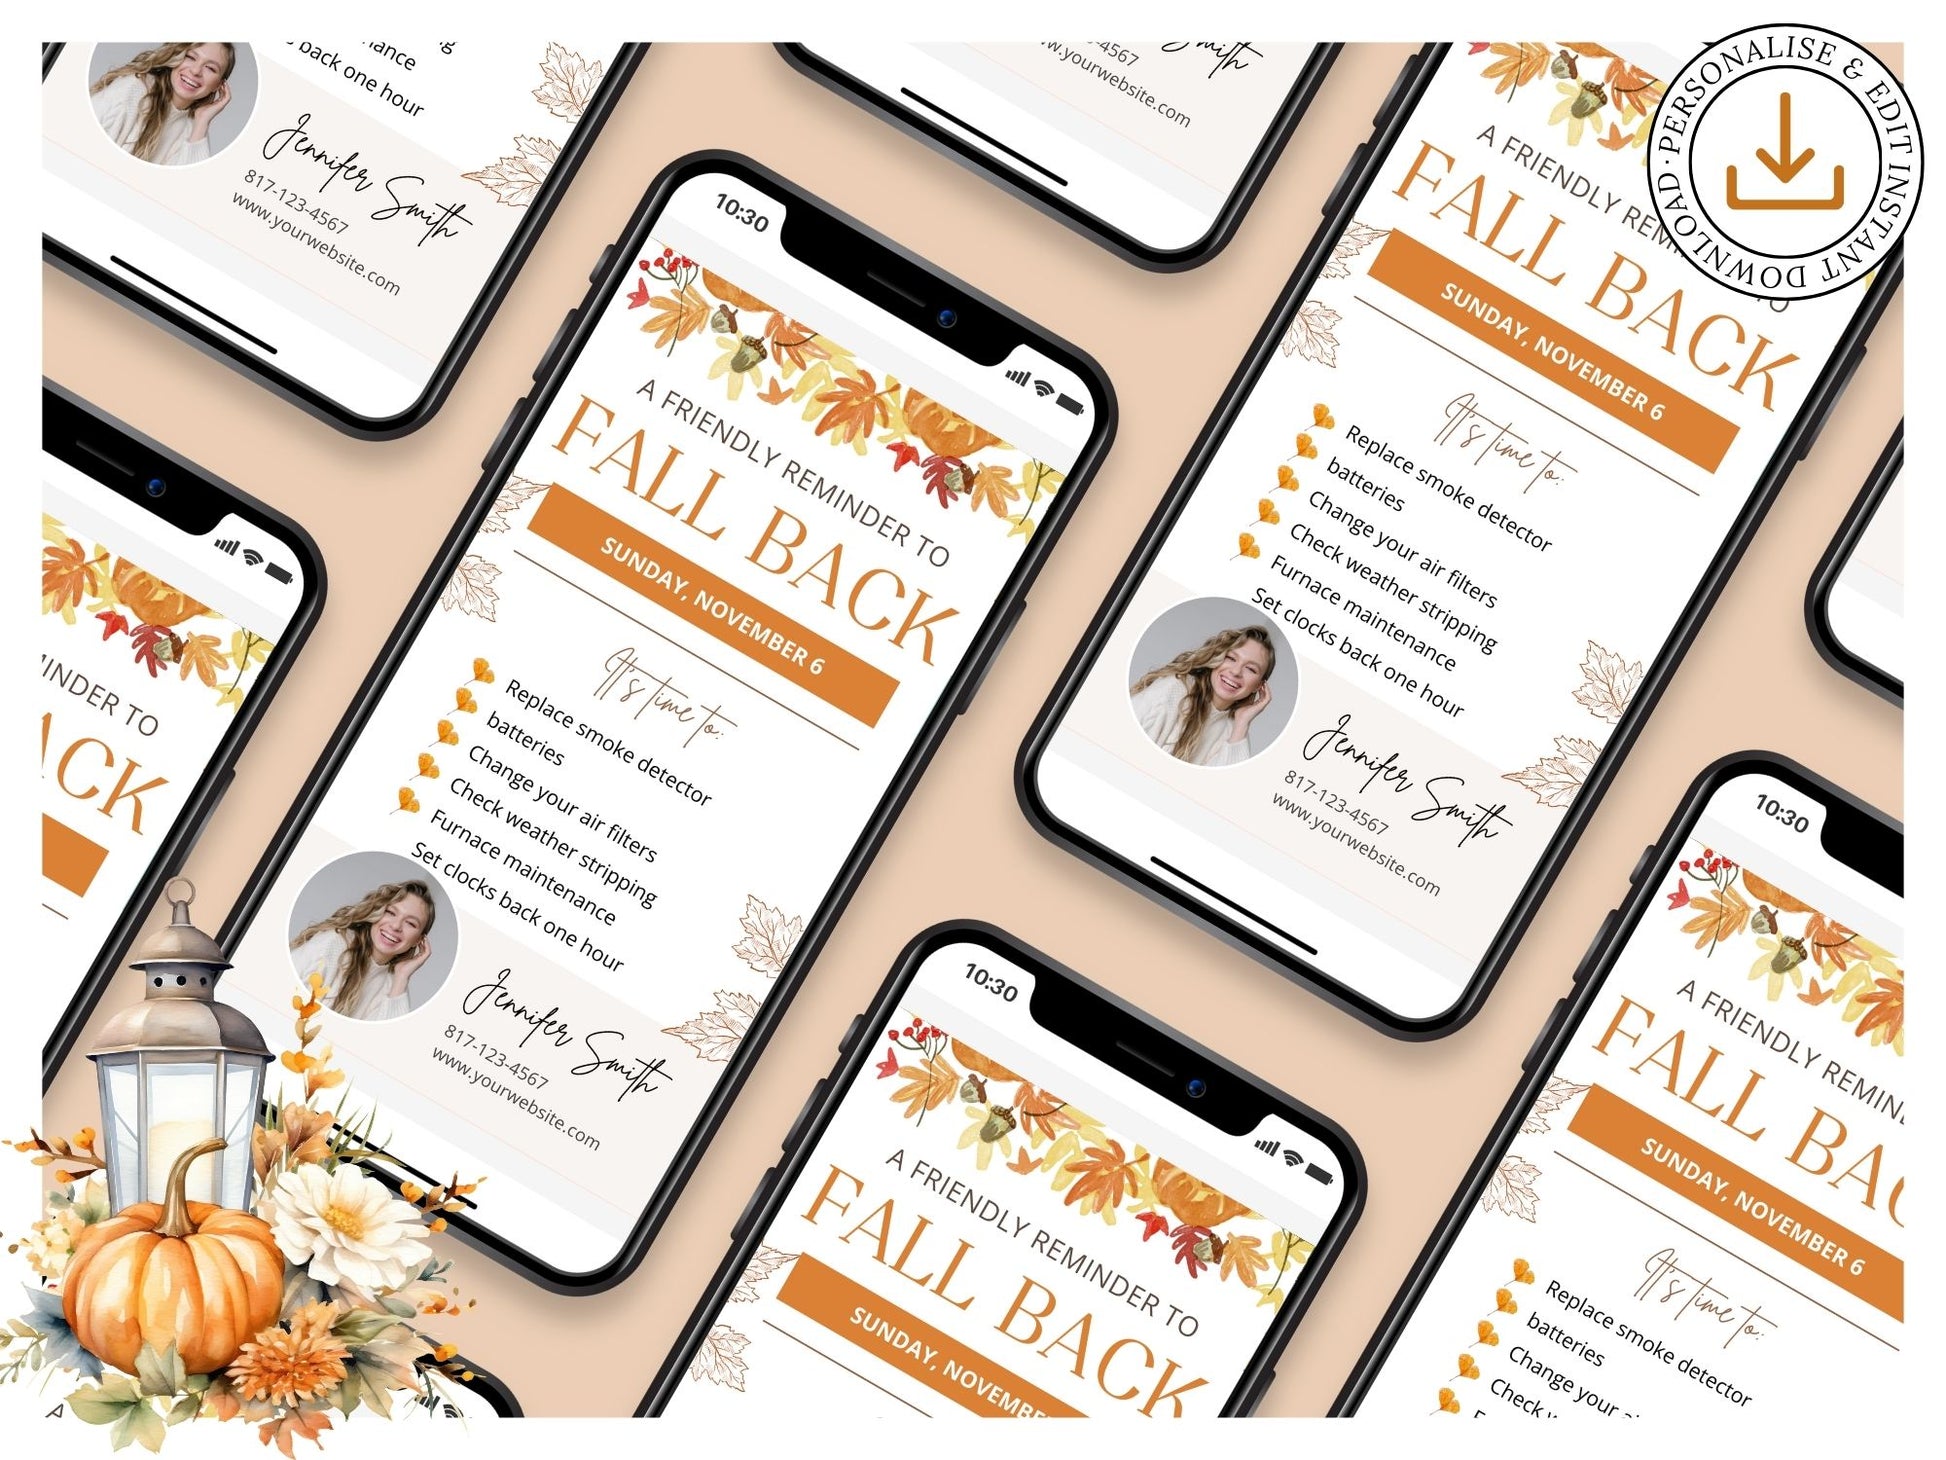 Real Estate Fall Back Digital Card Vol 02 - Visually appealing design for reminding clients about the time change and incorporating your real estate branding in the autumn season.